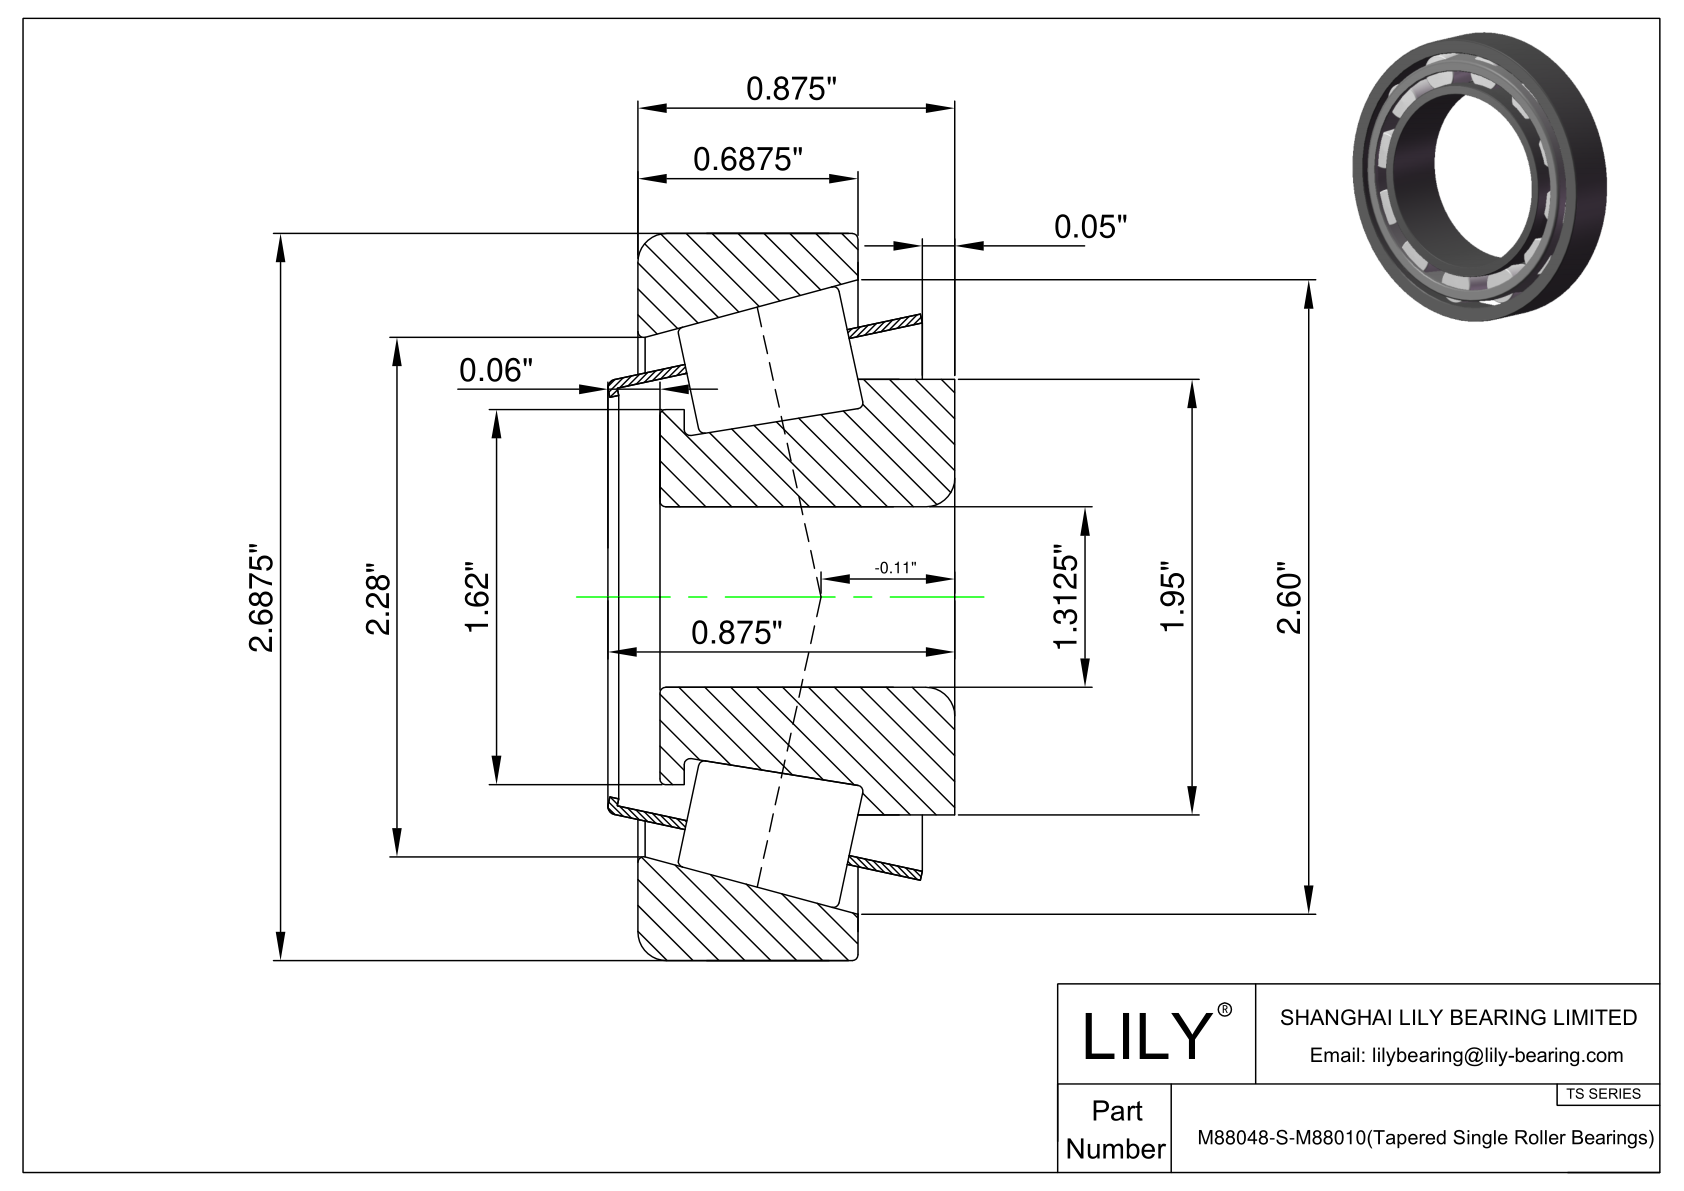 M88048-S-M88010 TS (Tapered Single Roller Bearings) (Imperial) cad drawing